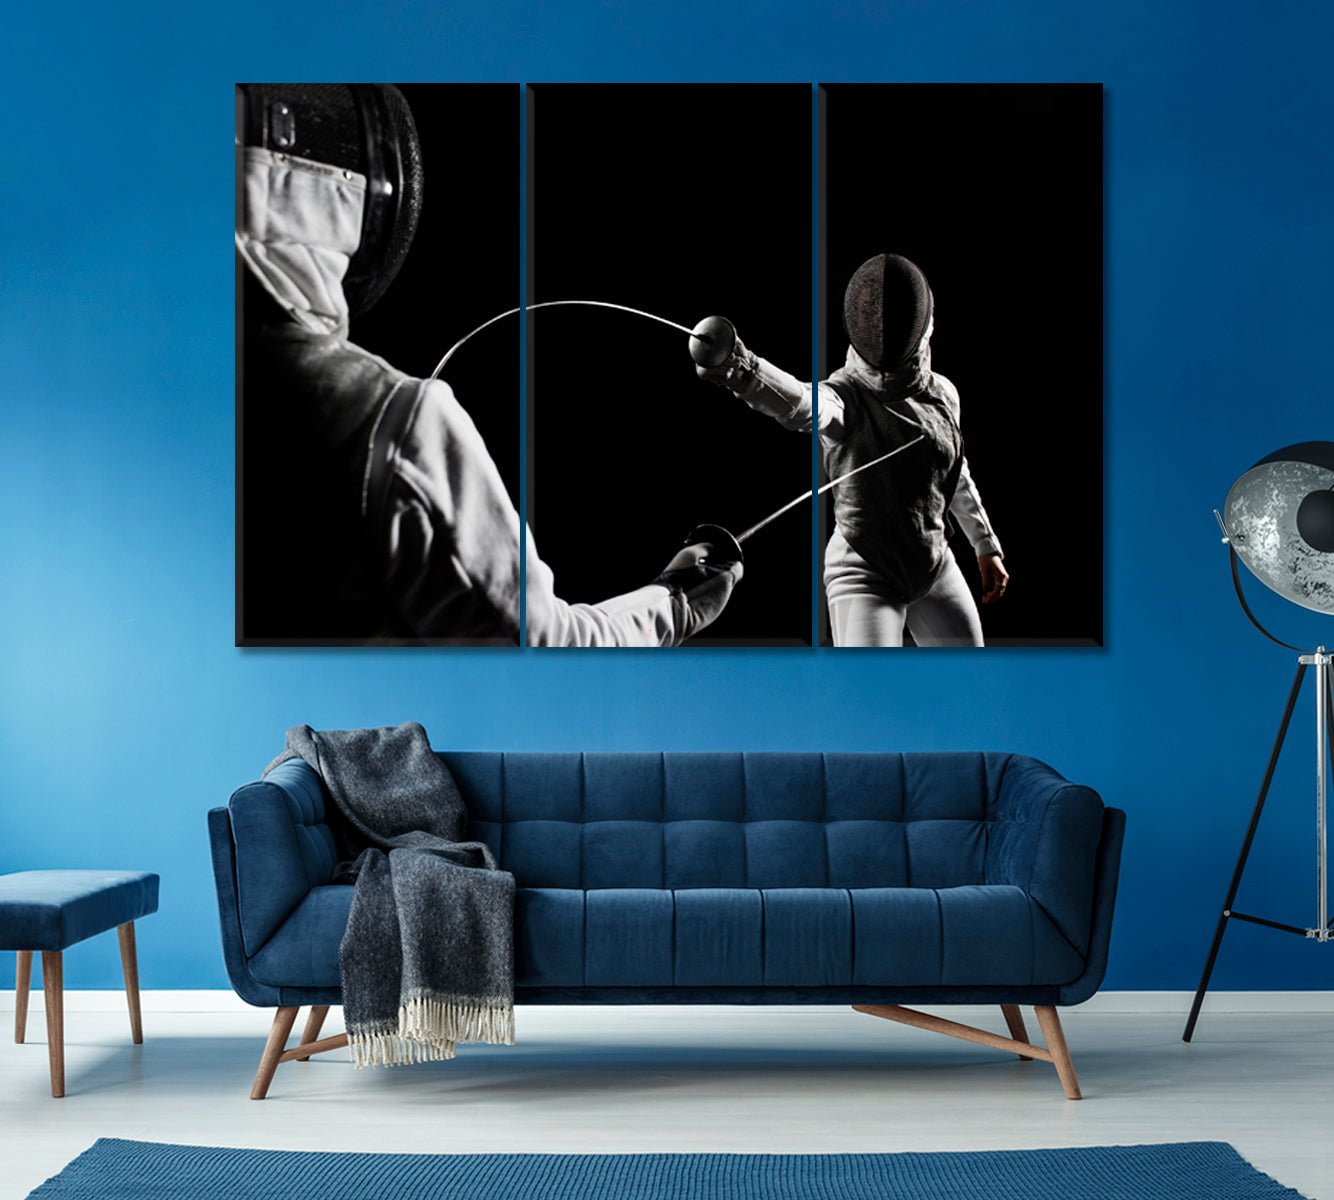 Fencing Action Canvas Print ArtLexy 3 Panels 36"x24" inches 